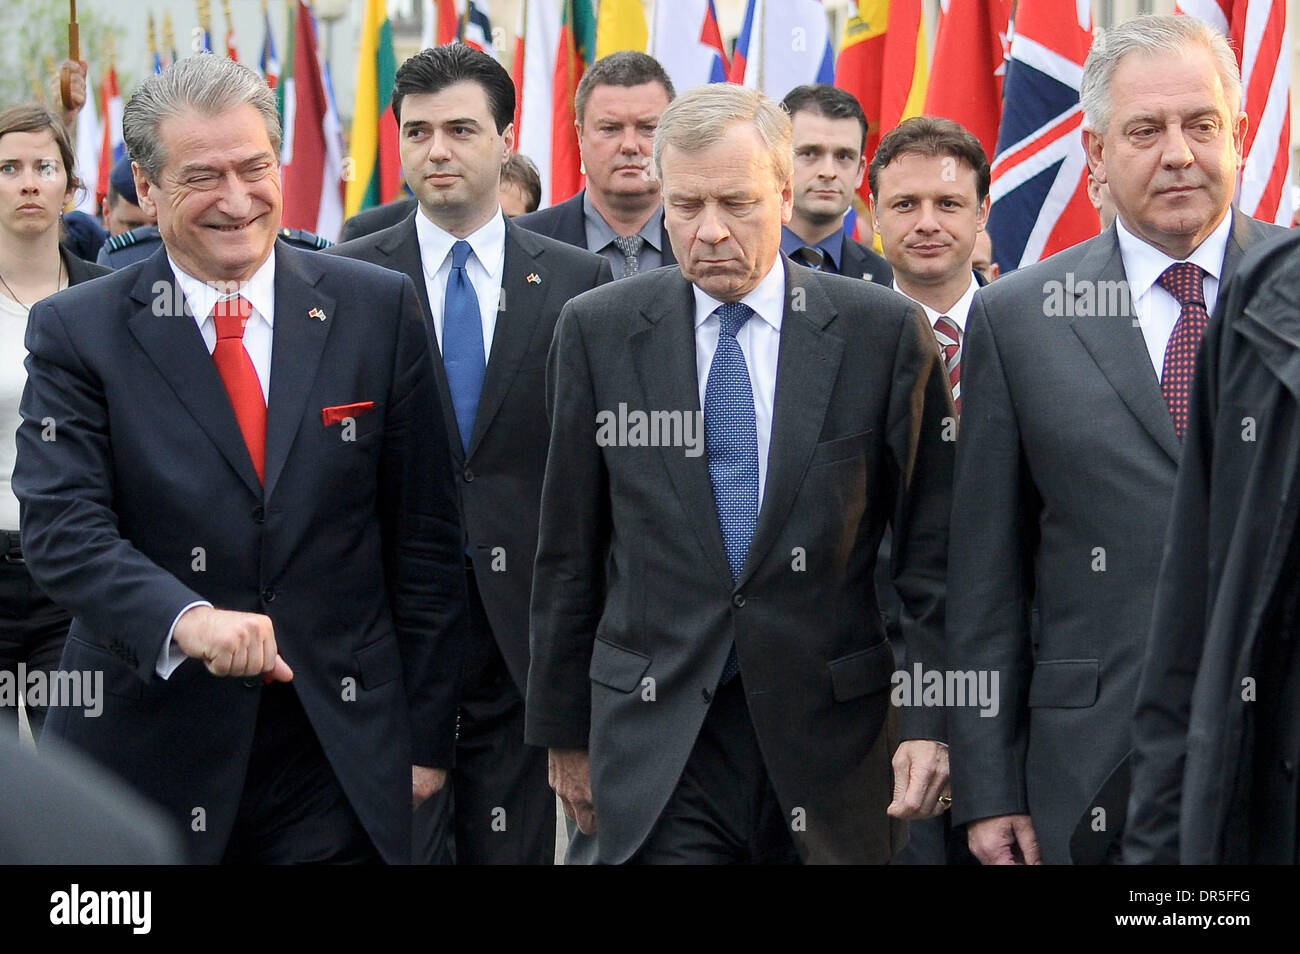 NATO Secretary-General Jaap de Hoop Scheffer (C), Albanian Prime Minister Sali Berisha (L) and his Foreign Minister Lulzim Basha (L in the background), Croatia Prime Minister Ivo Sanader (R) and his Foreign Minister Gordan Jandrokovic (R in the background) arrive to attend a ceremony to mark the accession of Albania and Croatia at the NATO Headquarters   in  Brussels, Belgium on 20 Stock Photo